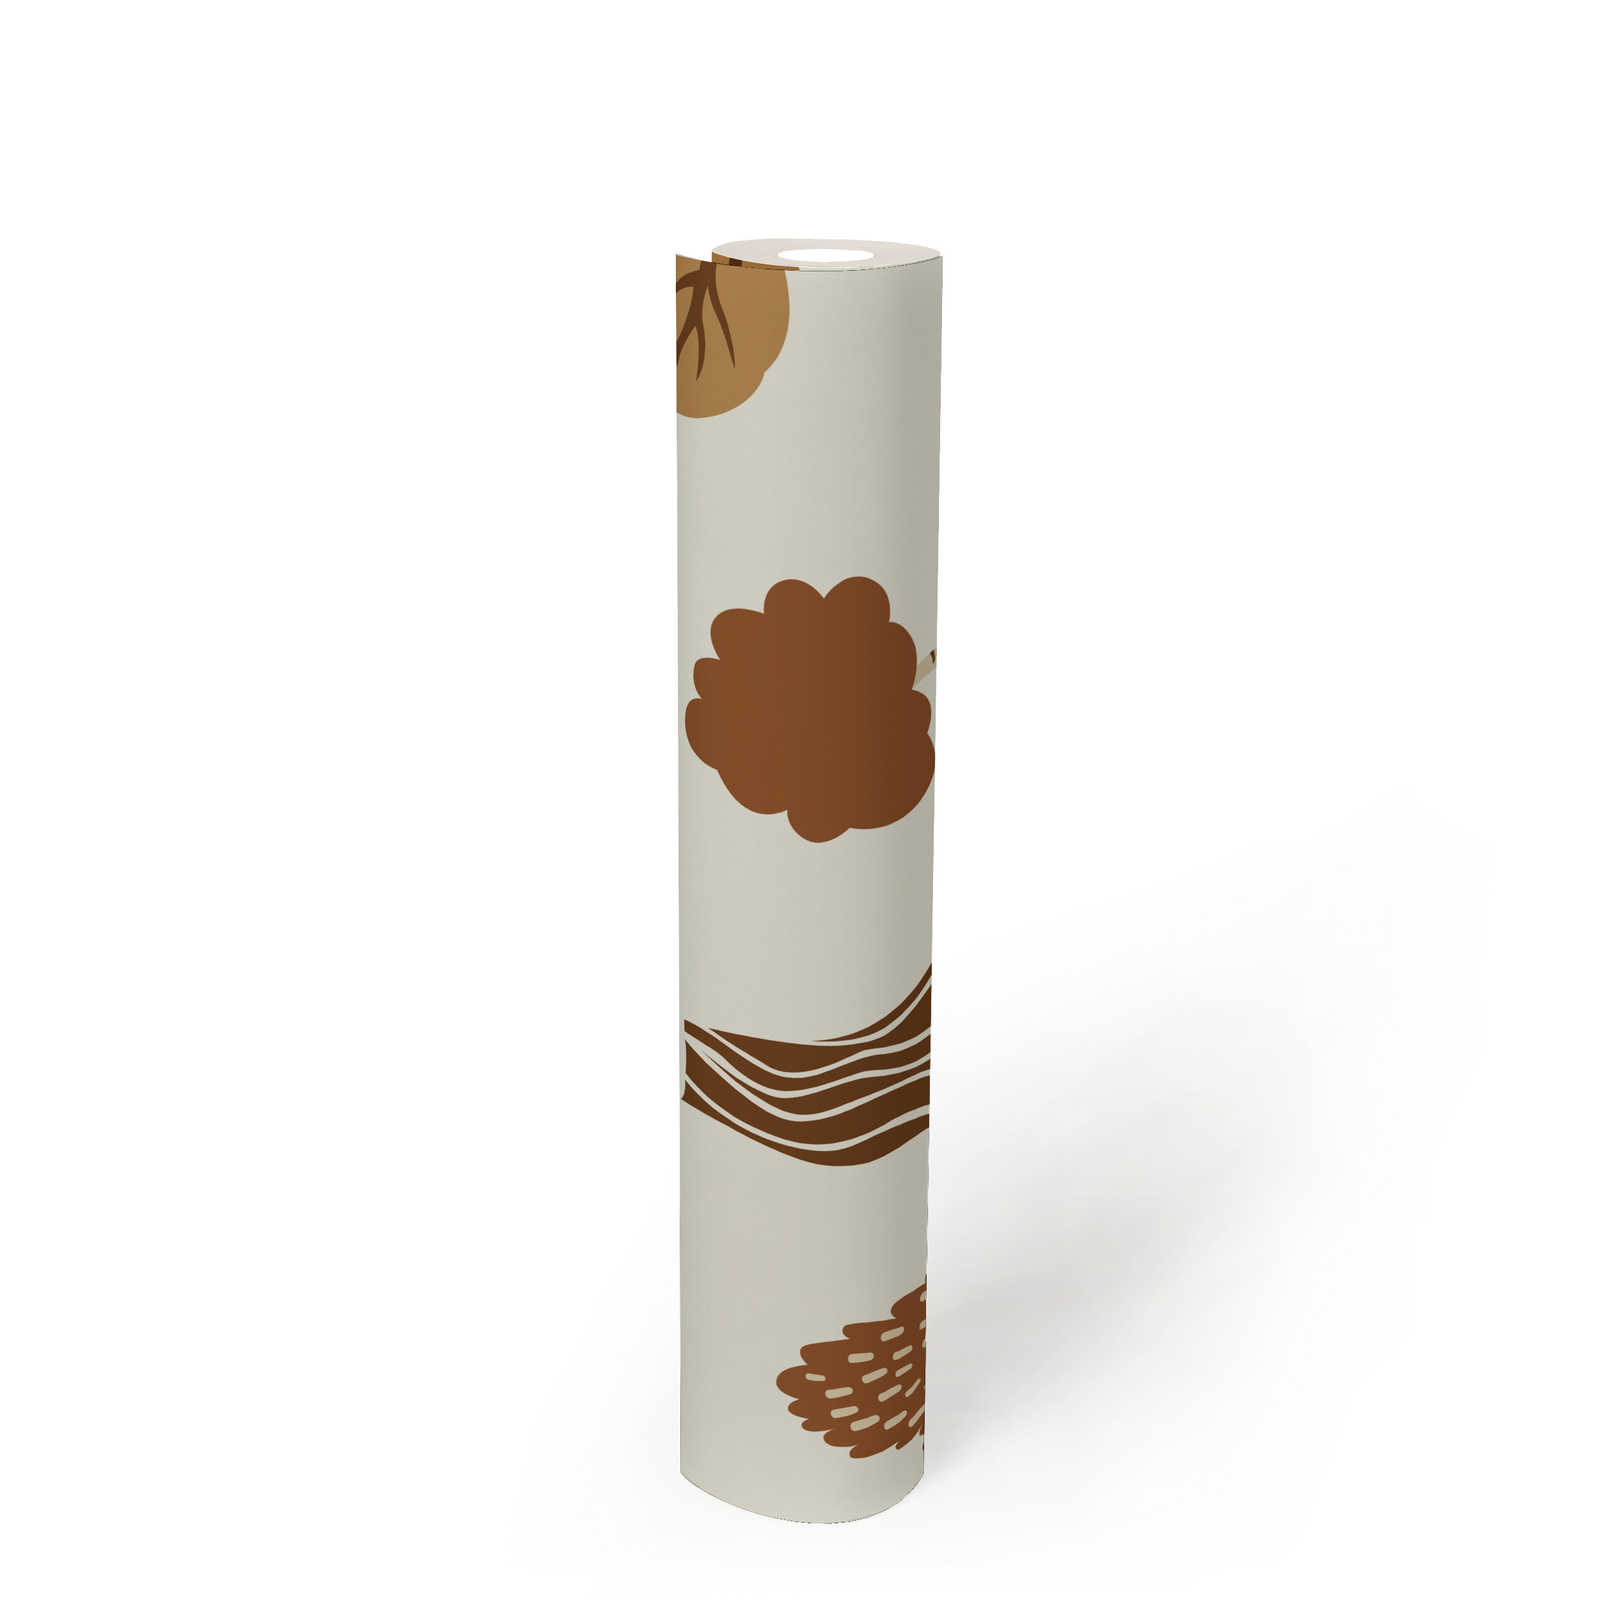             Forest motif non-woven wallpaper with autumnal trees - cream, brown
        